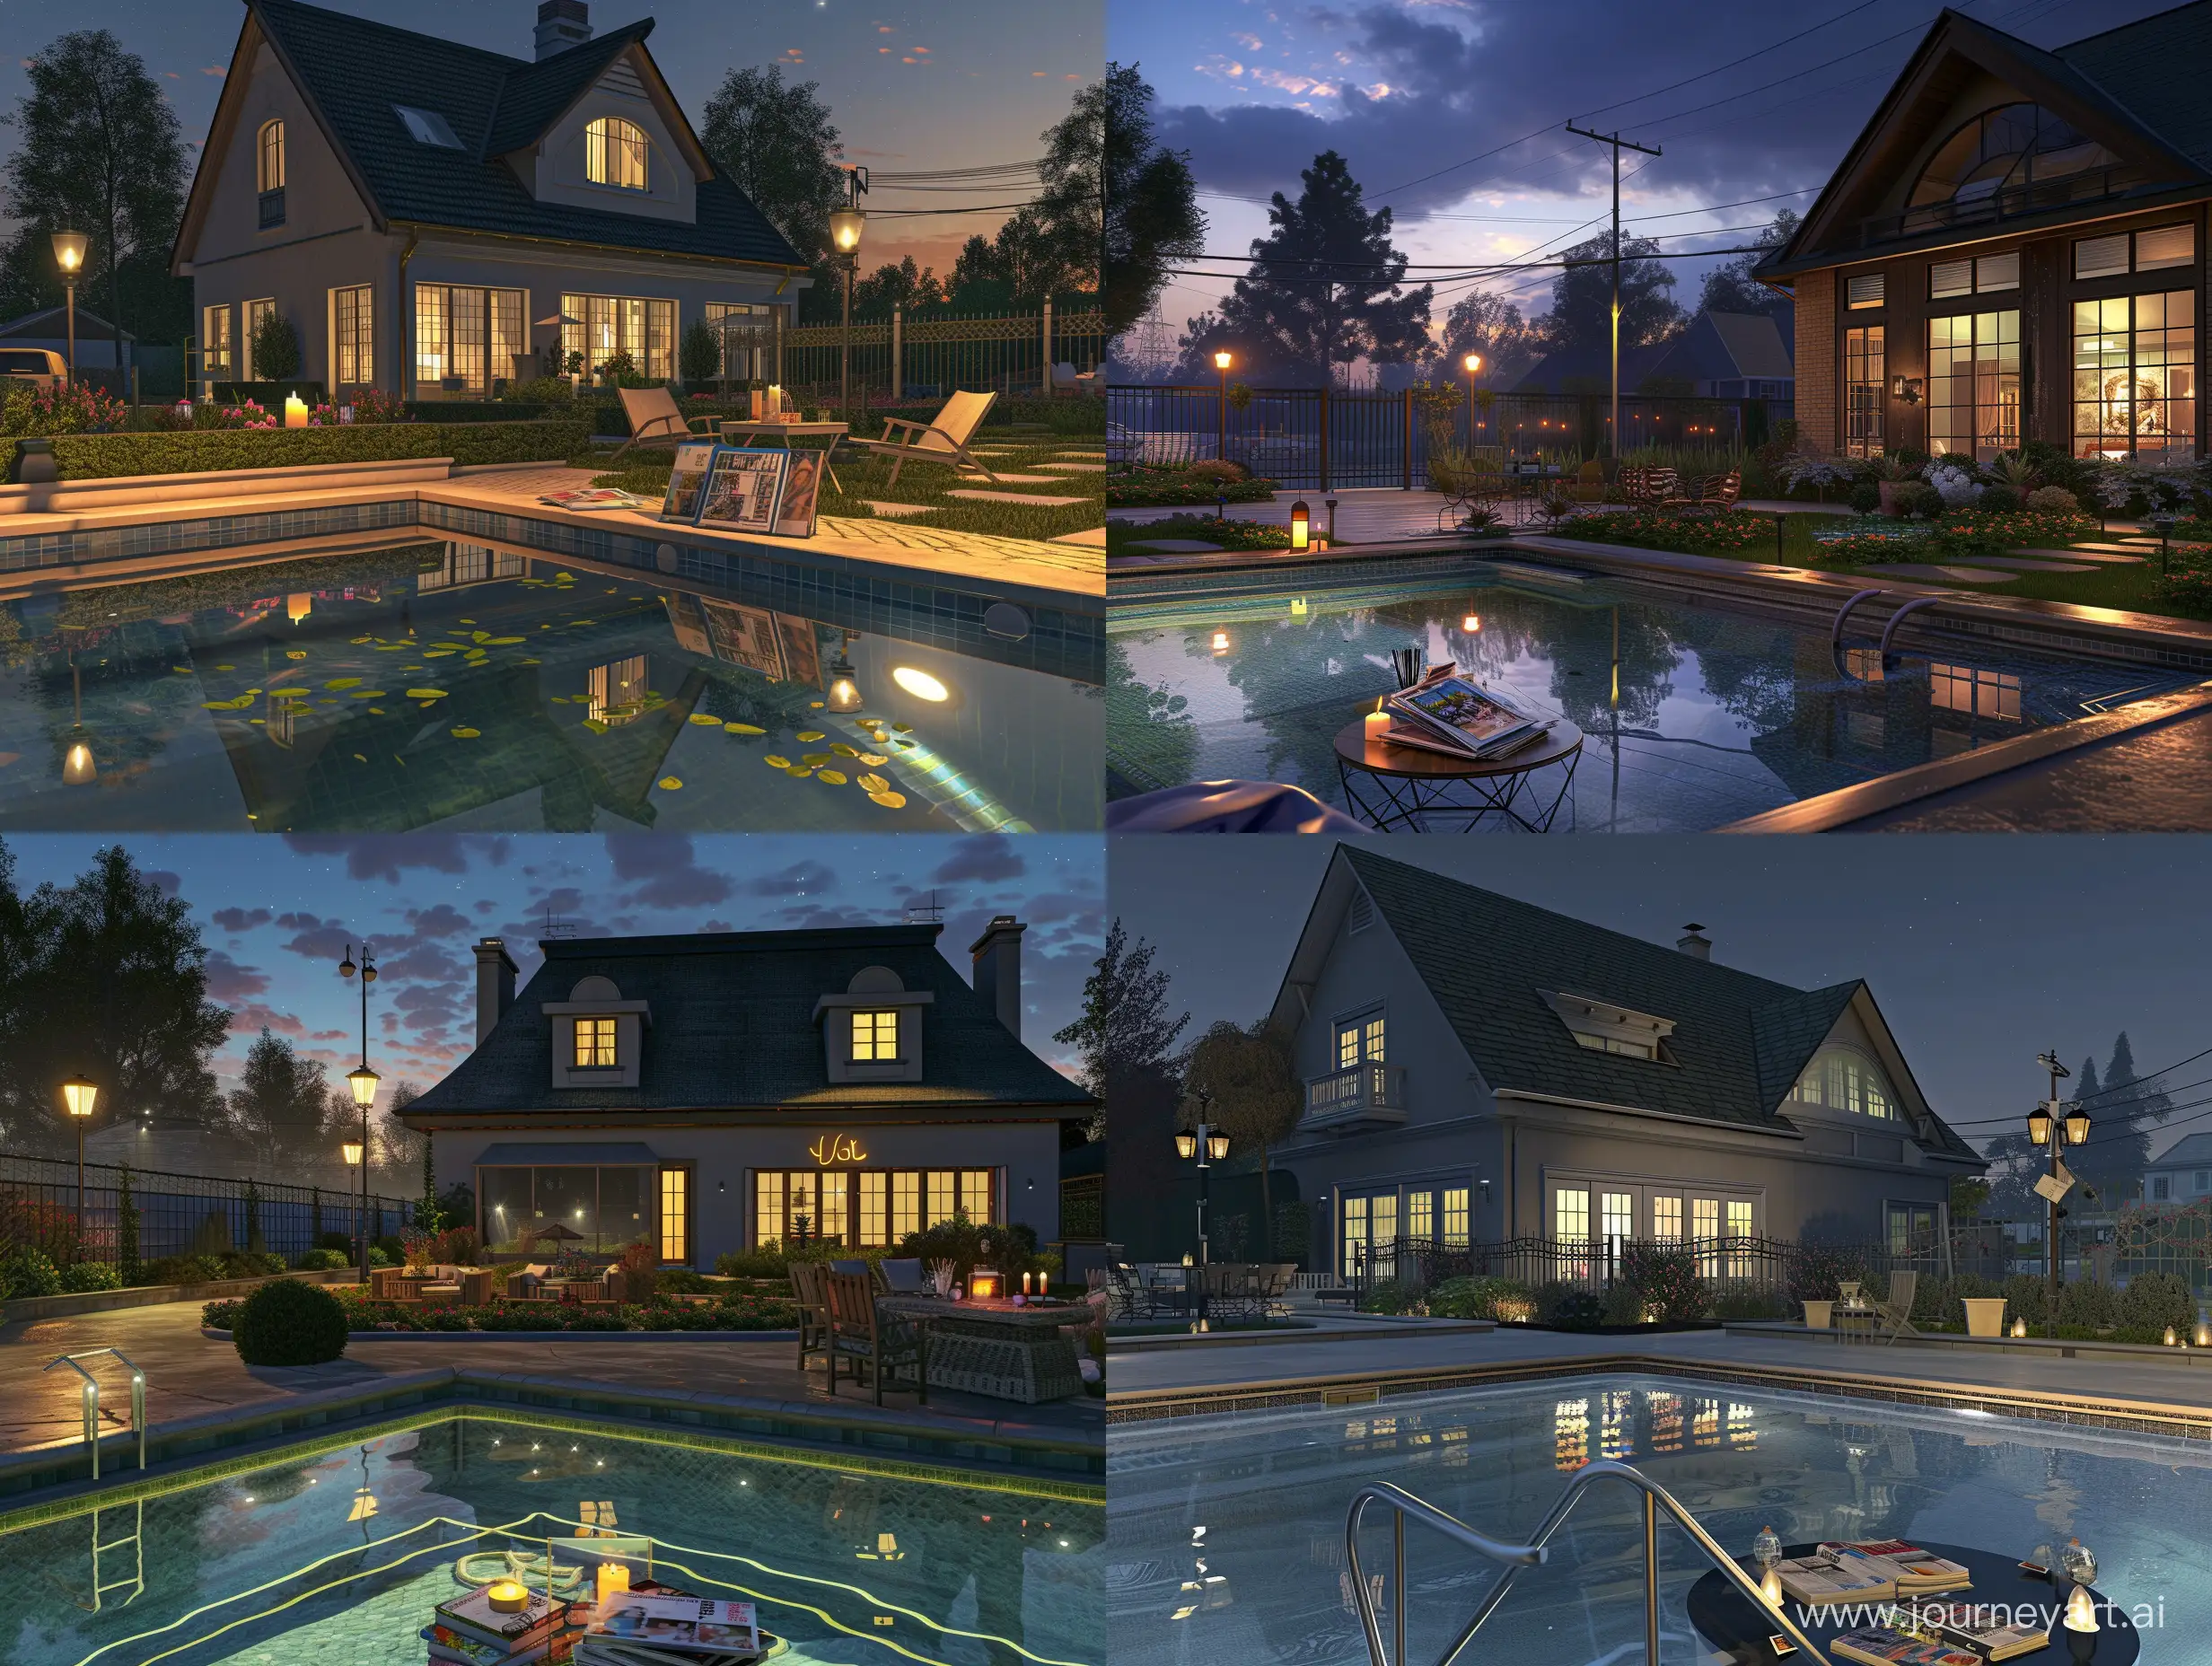 Tranquil-Night-Scene-American-Style-House-with-Gardens-and-Pool